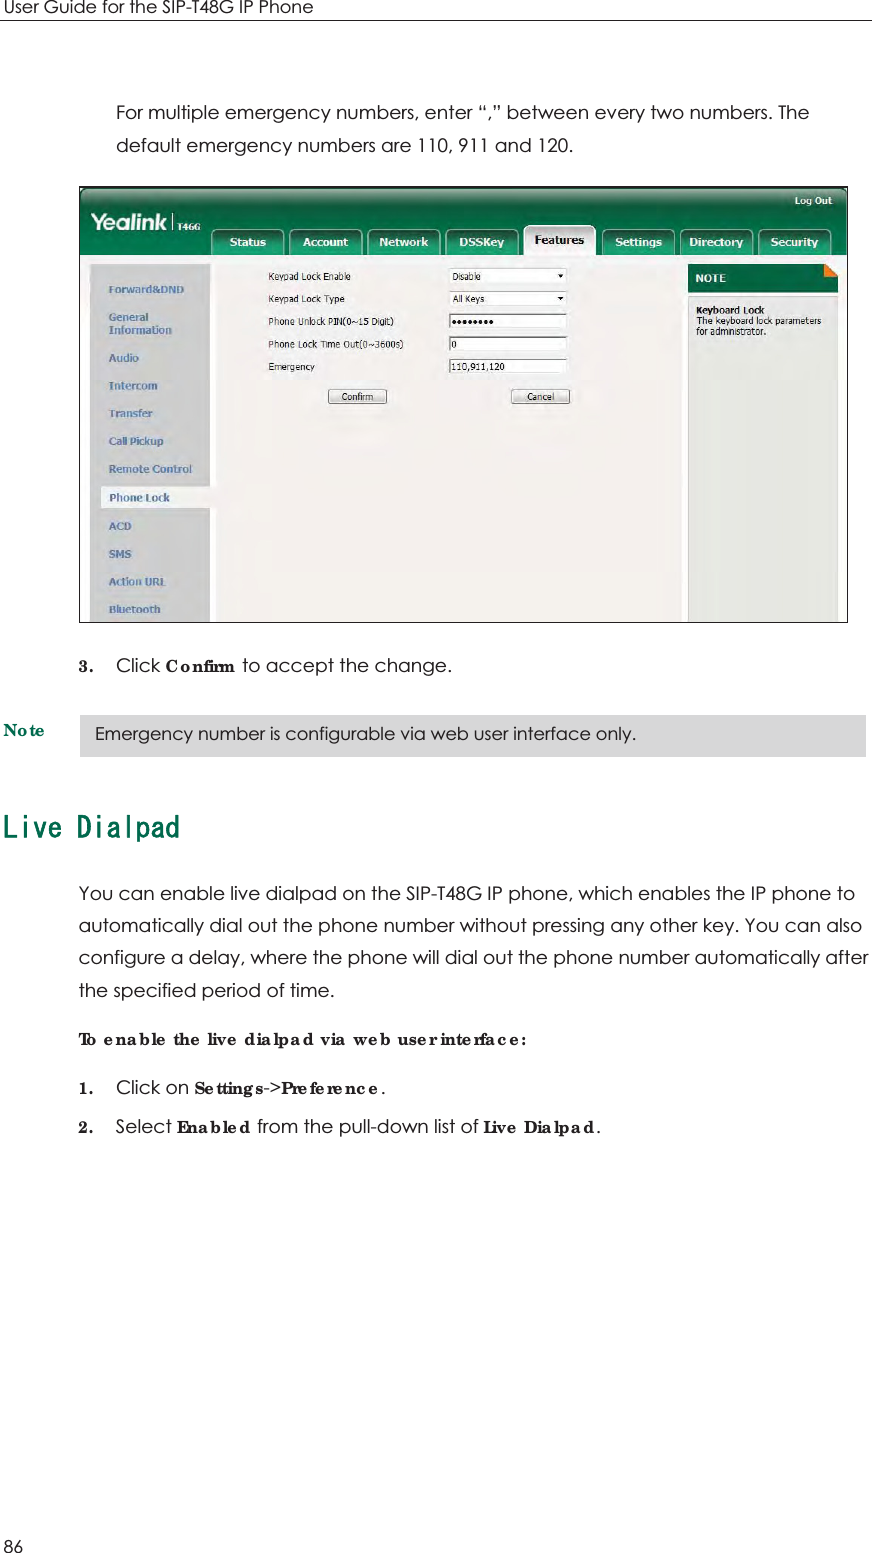 User Guide for the SIP-T48G IP Phone 86  For multiple emergency numbers, enter “,” between every two numbers. The default emergency numbers are 110, 911 and 120.  3. Click Confirm to accept the change. Note.KXG&amp;KCNRCFYou can enable live dialpad on the SIP-T48G IP phone, which enables the IP phone to automatically dial out the phone number without pressing any other key. You can also configure a delay, where the phone will dial out the phone number automatically after the specified period of time. To enable the live dialpad via web user interface: 1. Click on Settings-&gt;Preference. 2. Select Enabled from the pull-down list of Live Dialpad. Emergency number is configurable via web user interface only. 